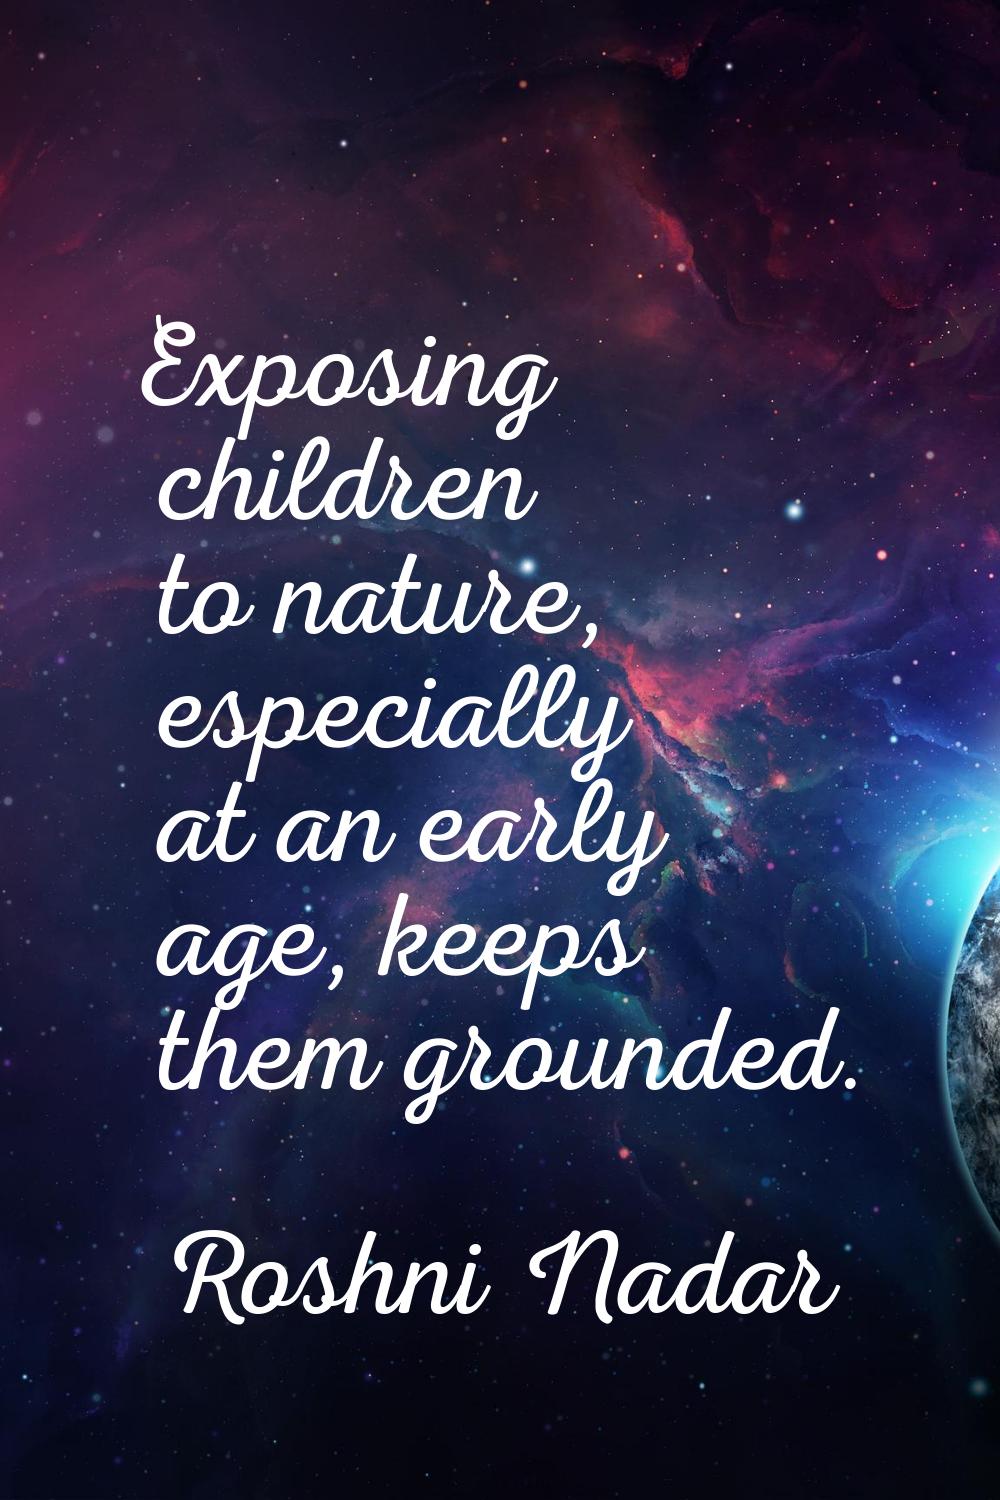 Exposing children to nature, especially at an early age, keeps them grounded.